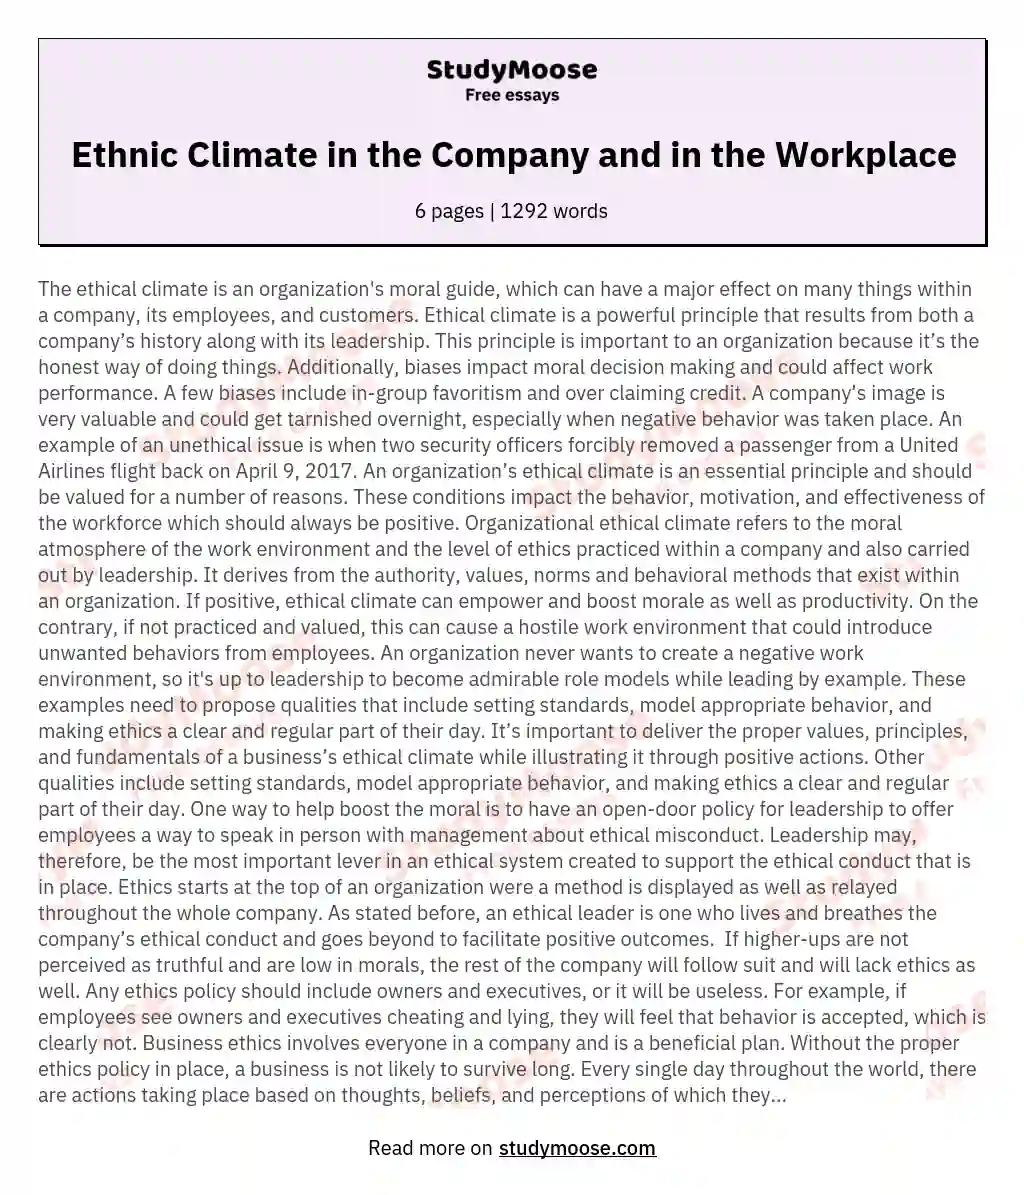 Ethnic Climate in the Company and in the Workplace essay